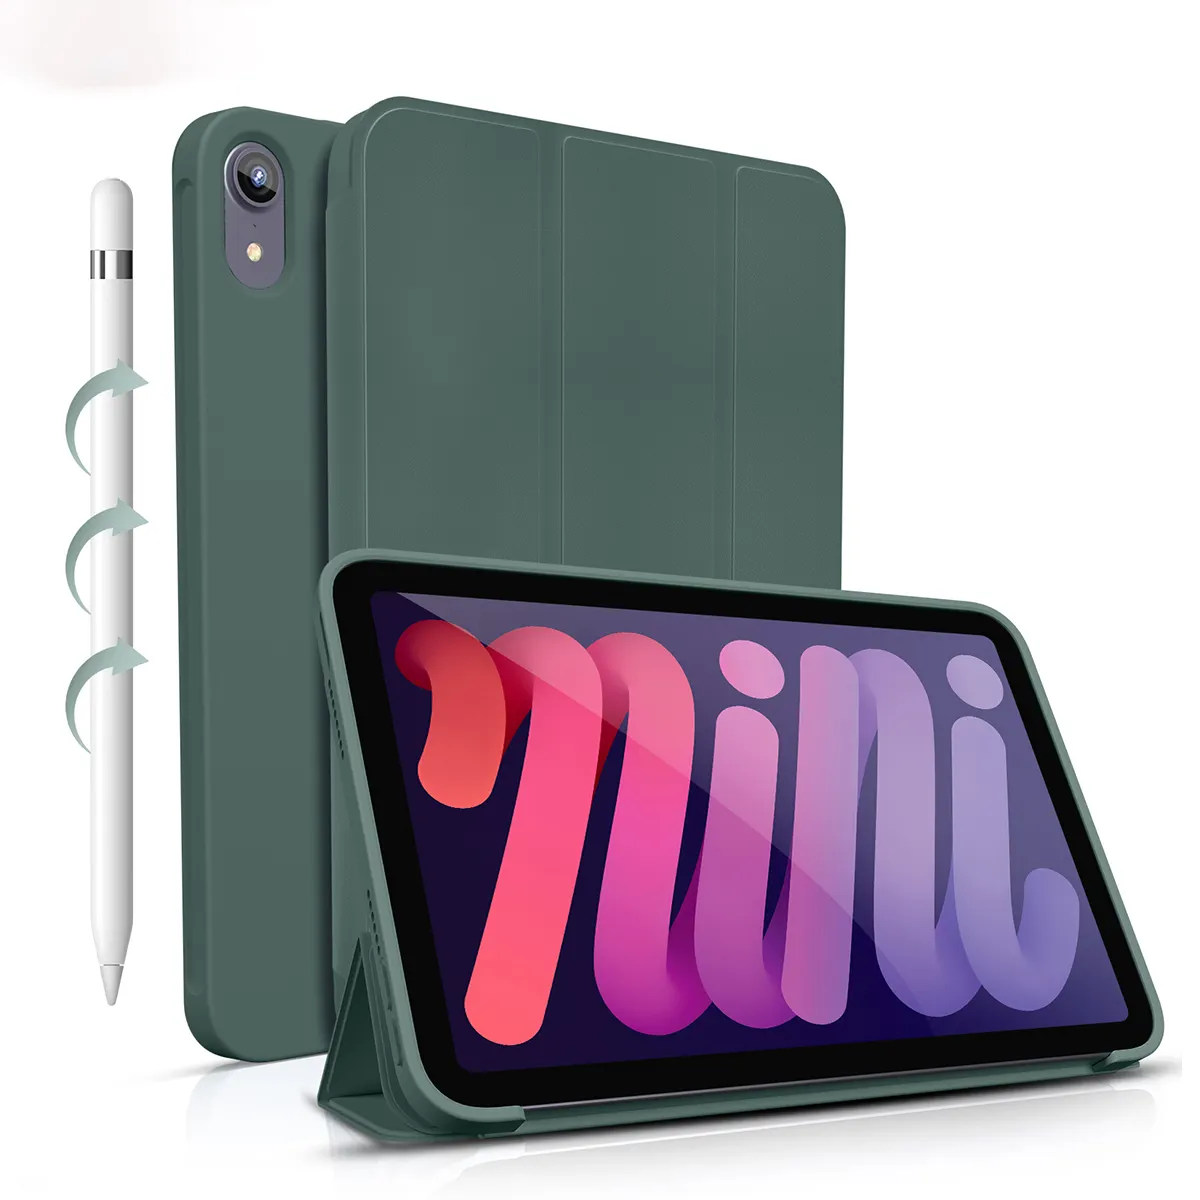 Magnetic Case Tri fold Stand Smart Cover for iPad Mini 6 8.3 inch Soft TPU Silicone Shockproof Cover for iPad Mini 1 2 3 4 5 7.9